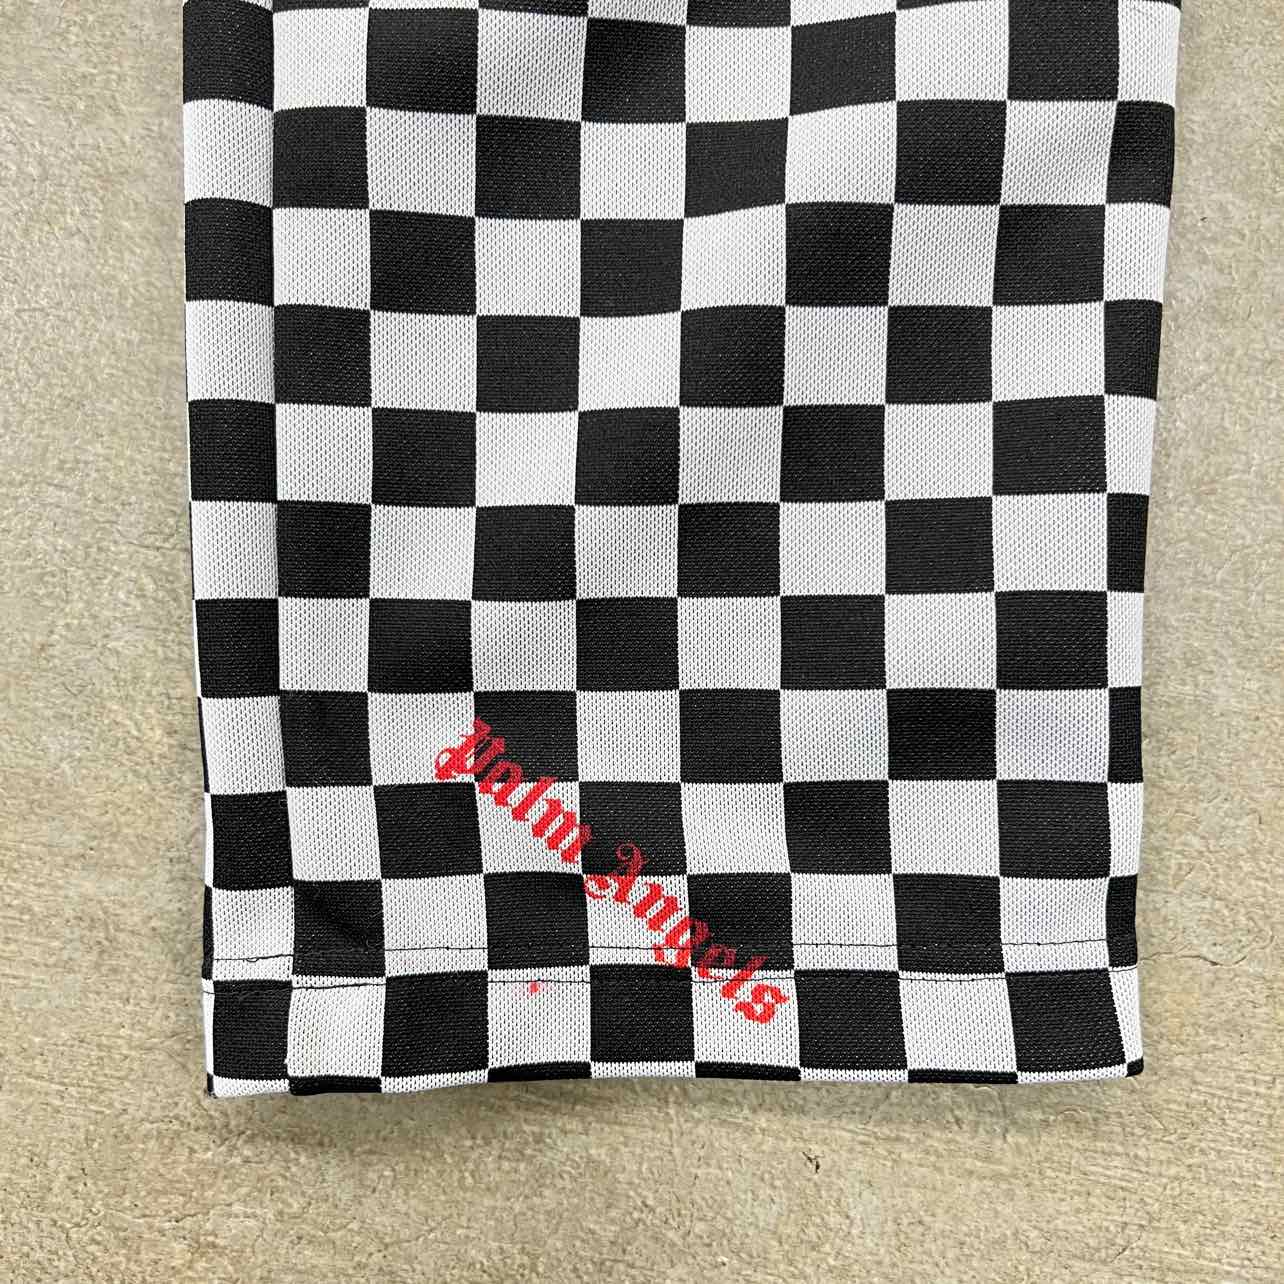 Palm Angels Track Pants "CHECKER" Black White Used Size S